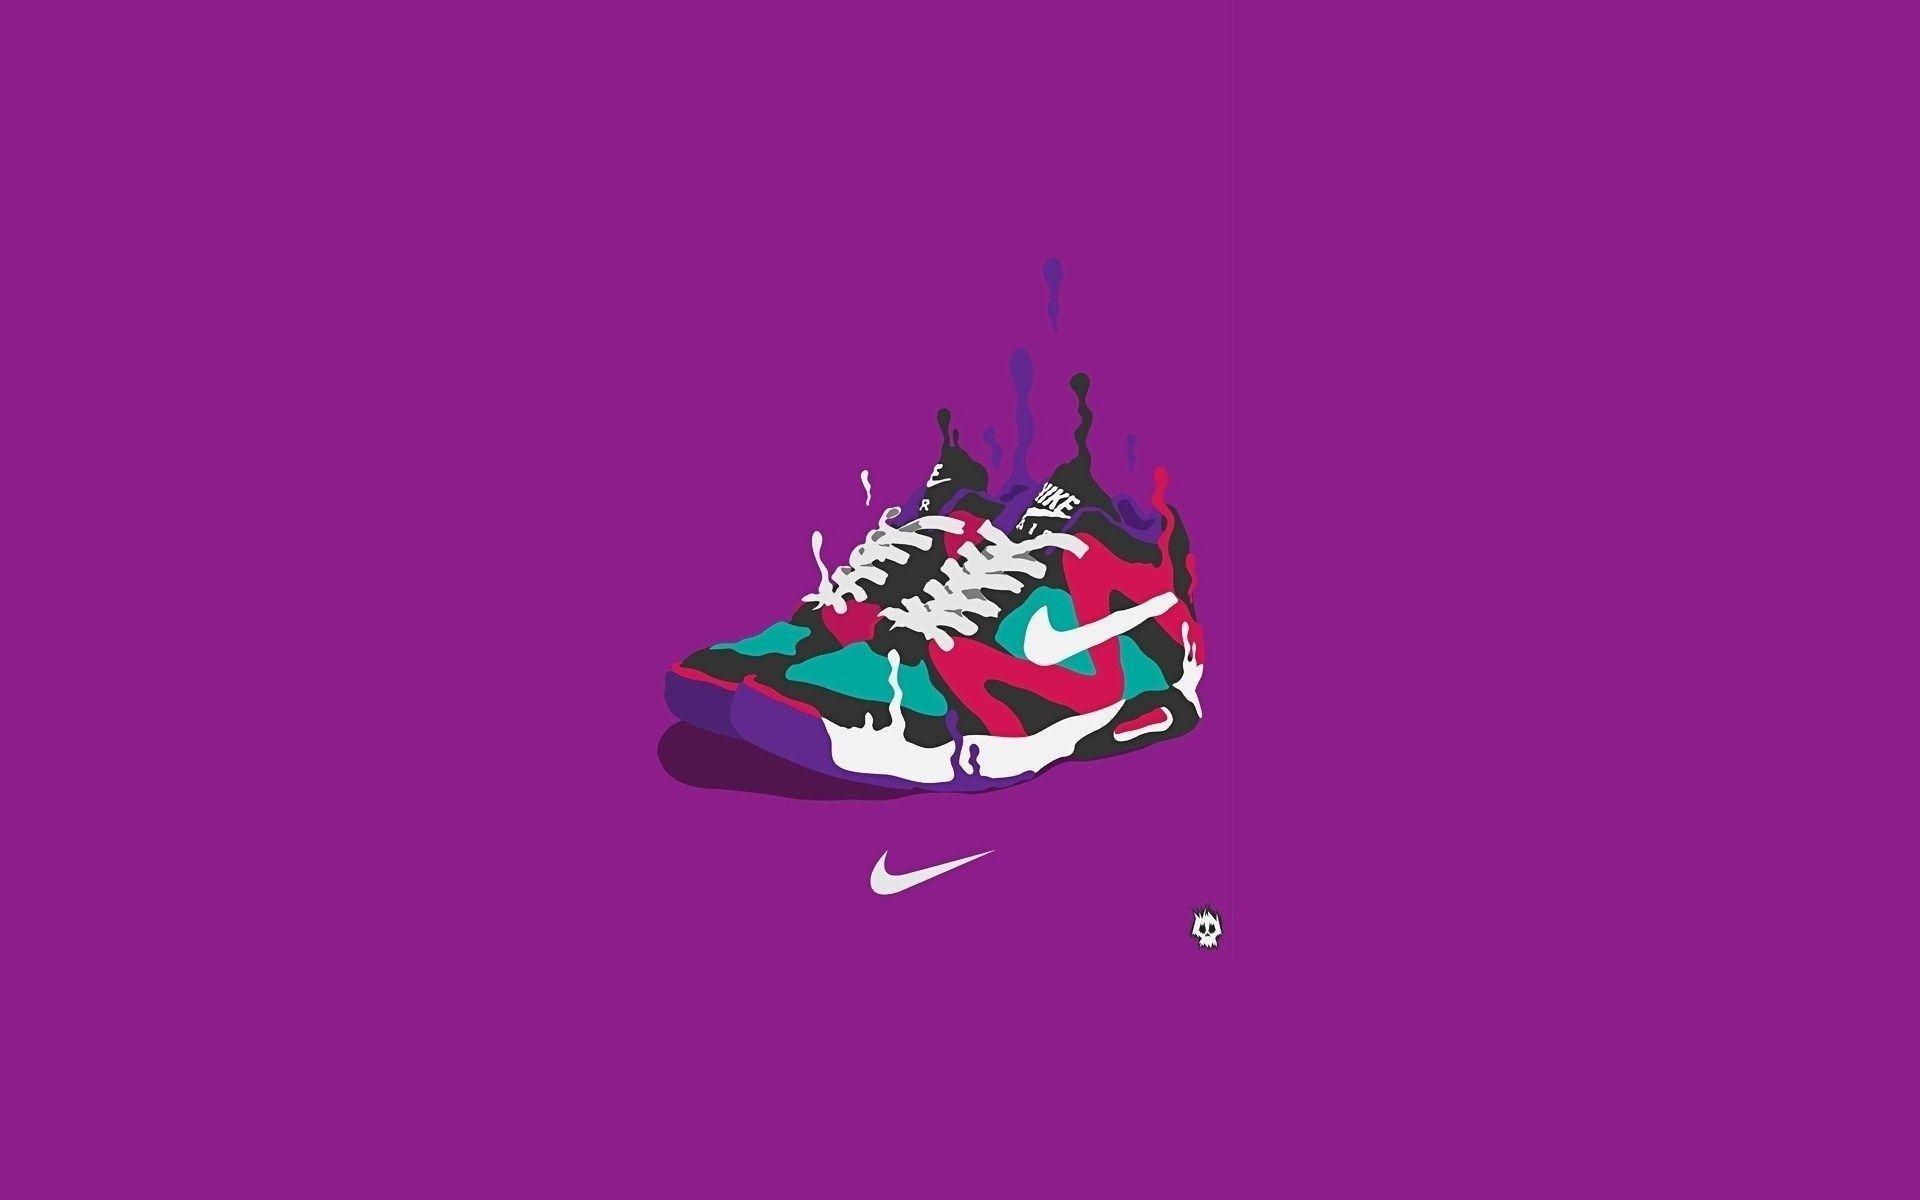 Find out: Nike Basketball Shoes Art wallpaper on hdpicorner.com